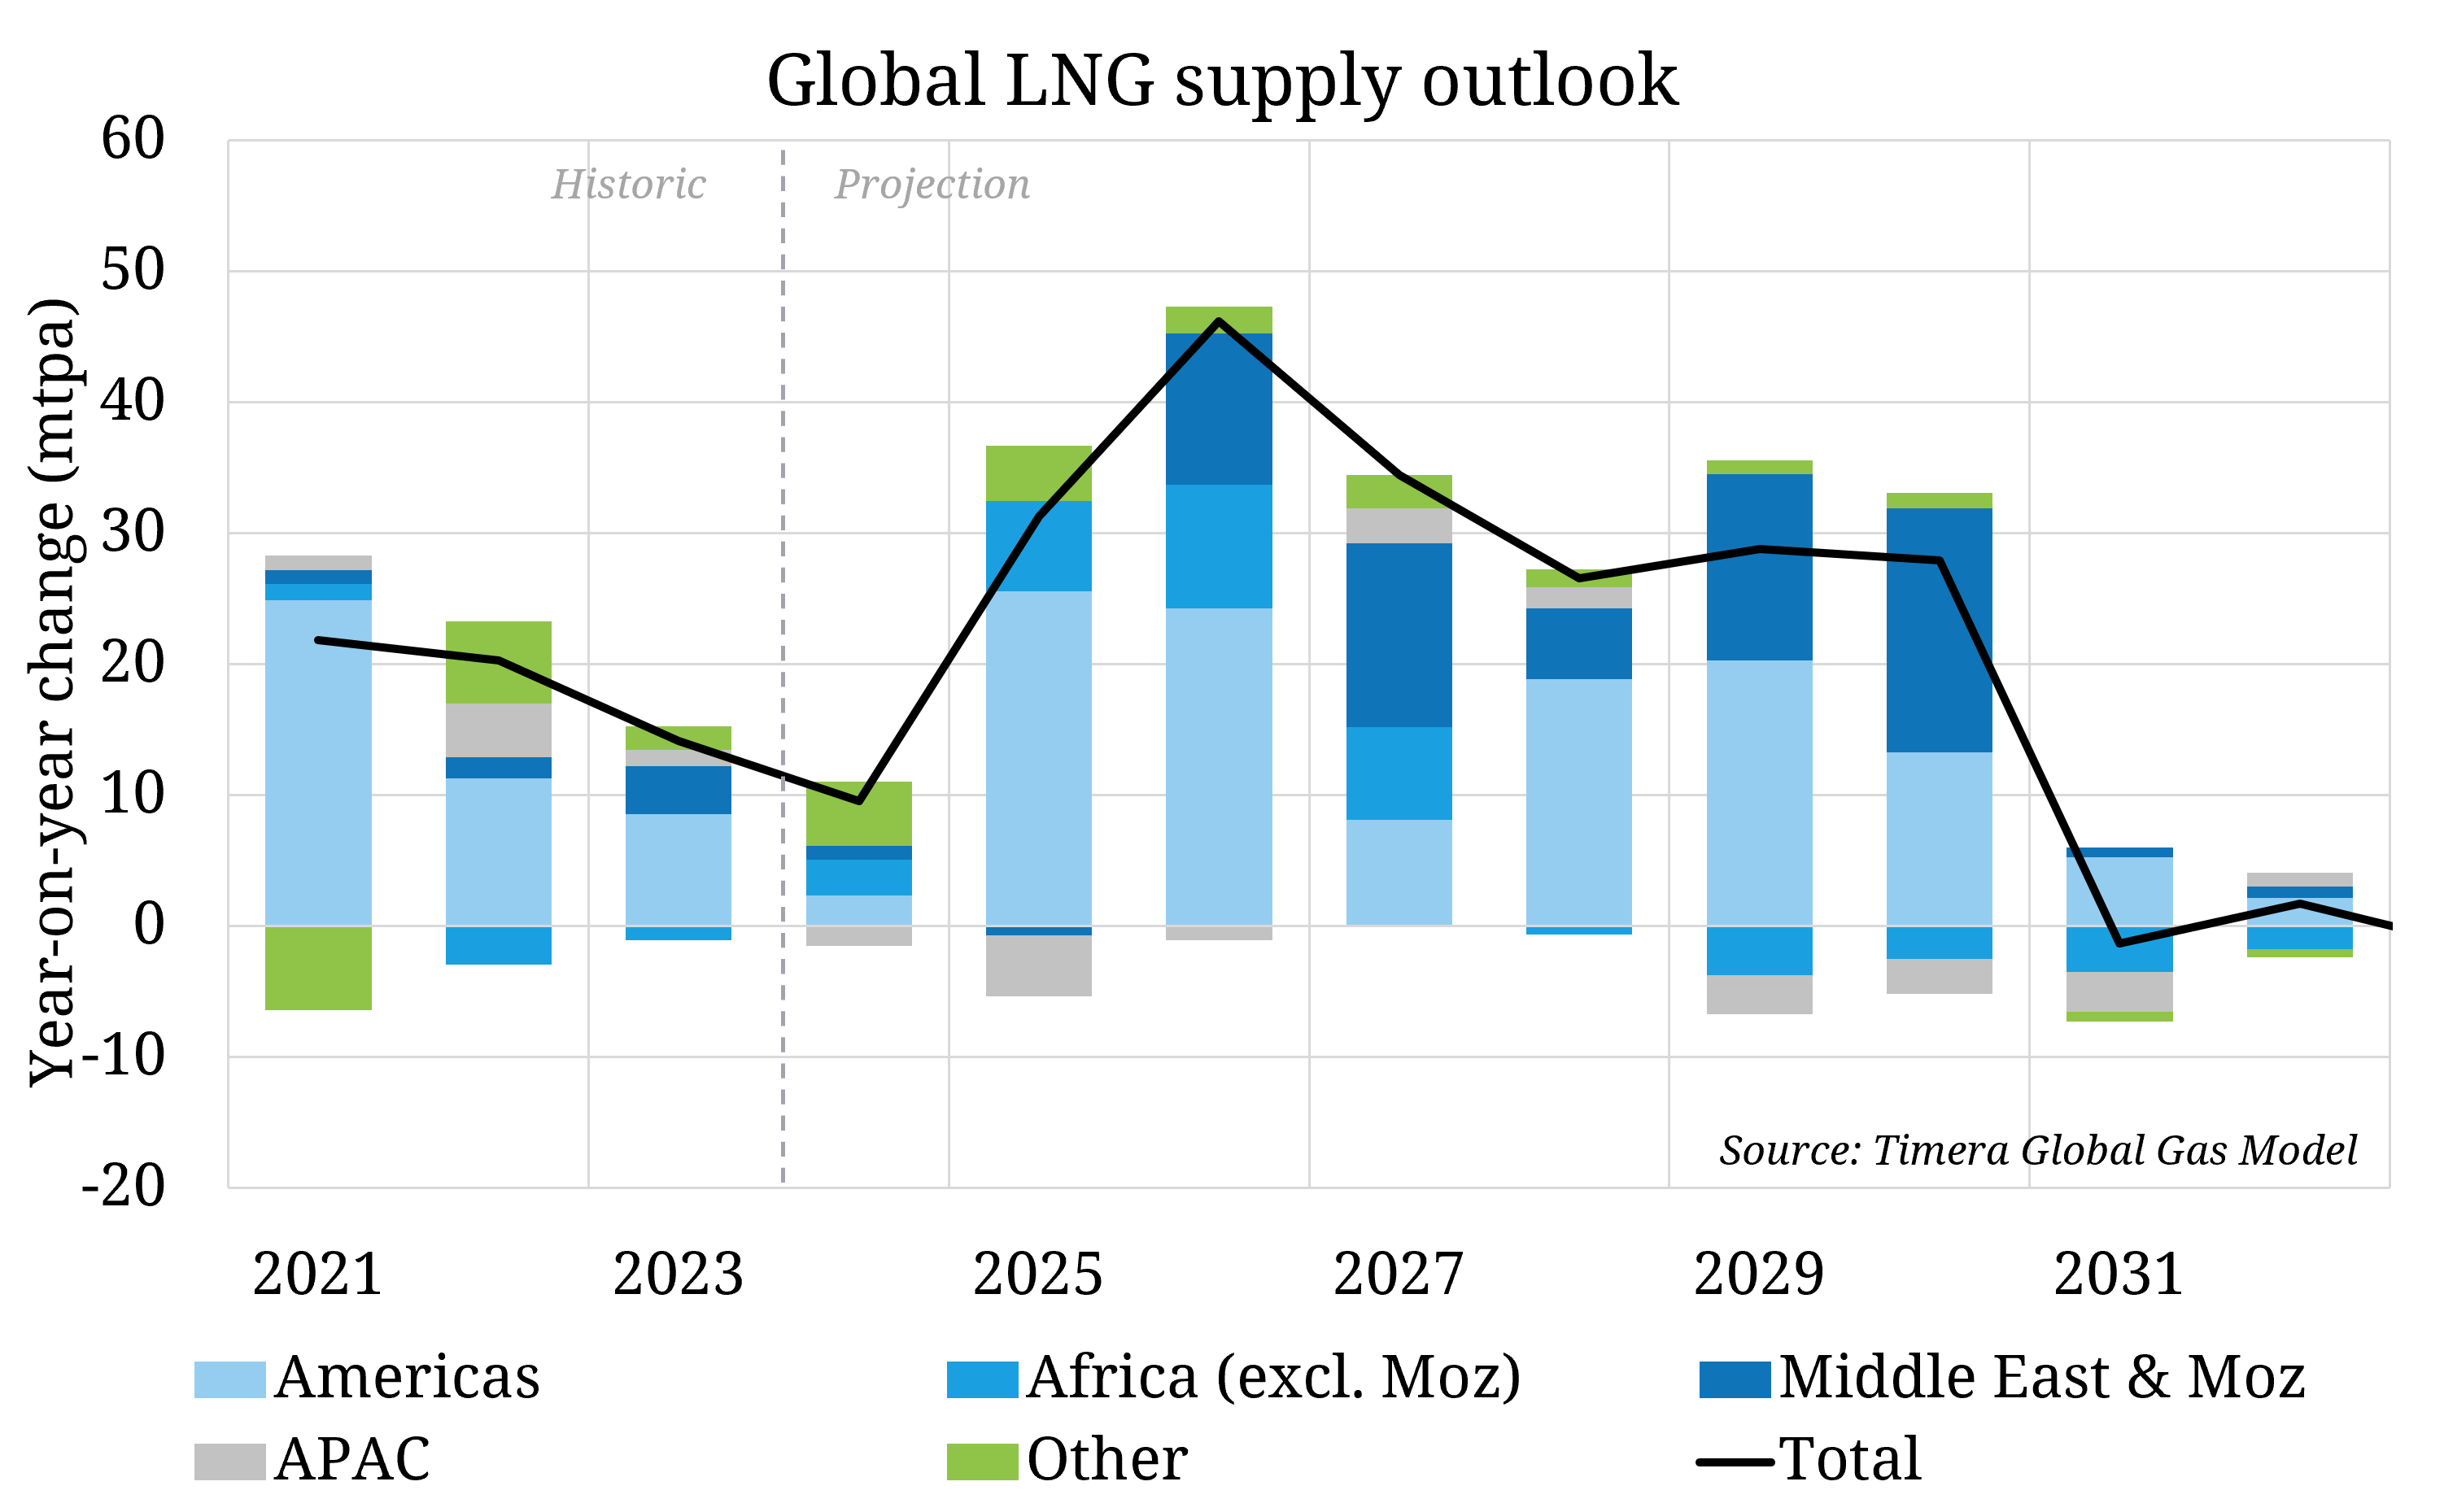 US poses regulatory risk to LNG exports